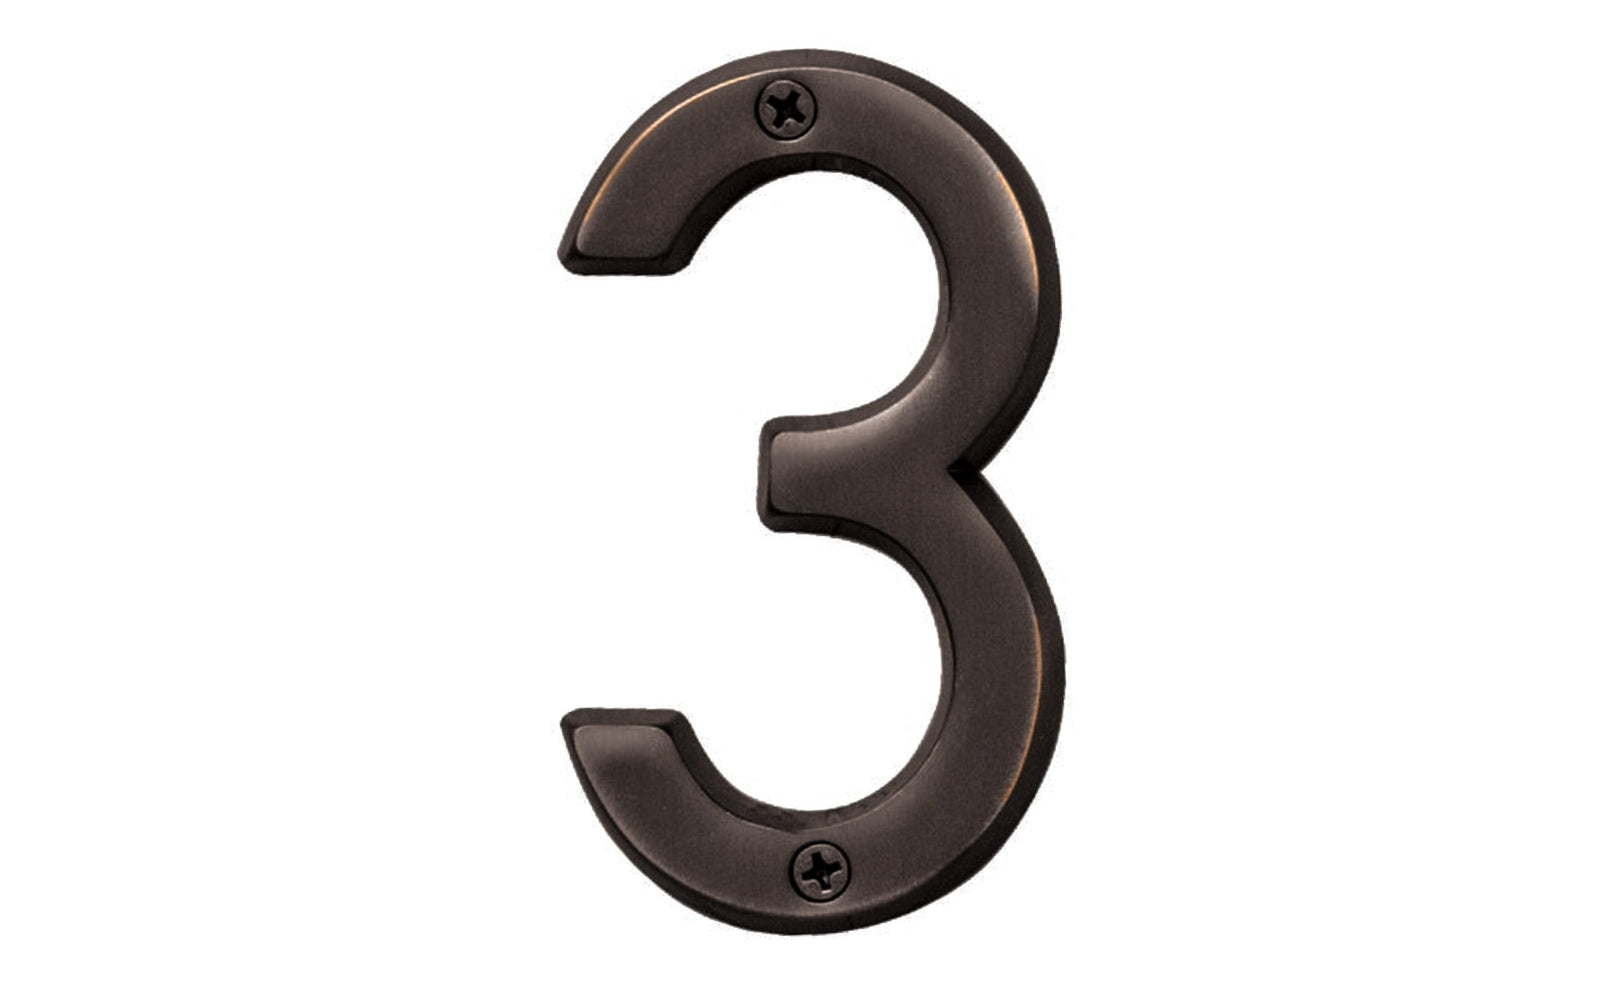 Number Three House Number in a 4" size. Made of solid brass material with an oil rubbed bronze finish. Hy-Ko Model BR-420WB/3. Number "3" house number. Old World Bronze finish. Hardware house numbers for outdoors. Includes screws. 029069309435. 